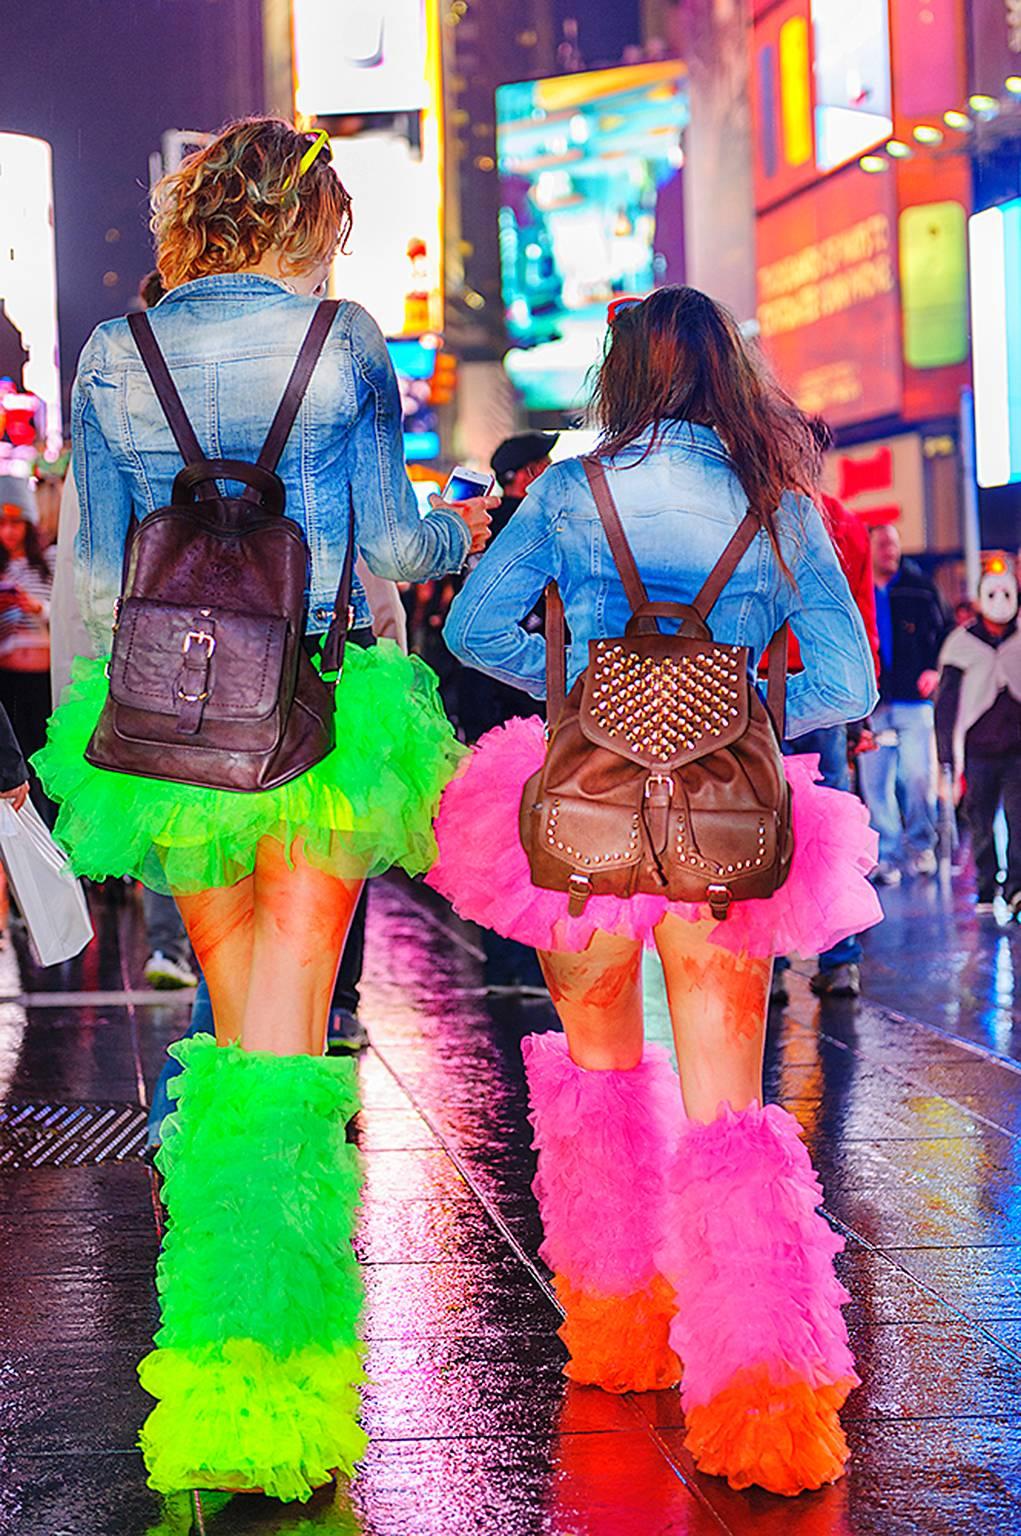 Mitchell Funk Color Photograph - Colored Boots Times Square